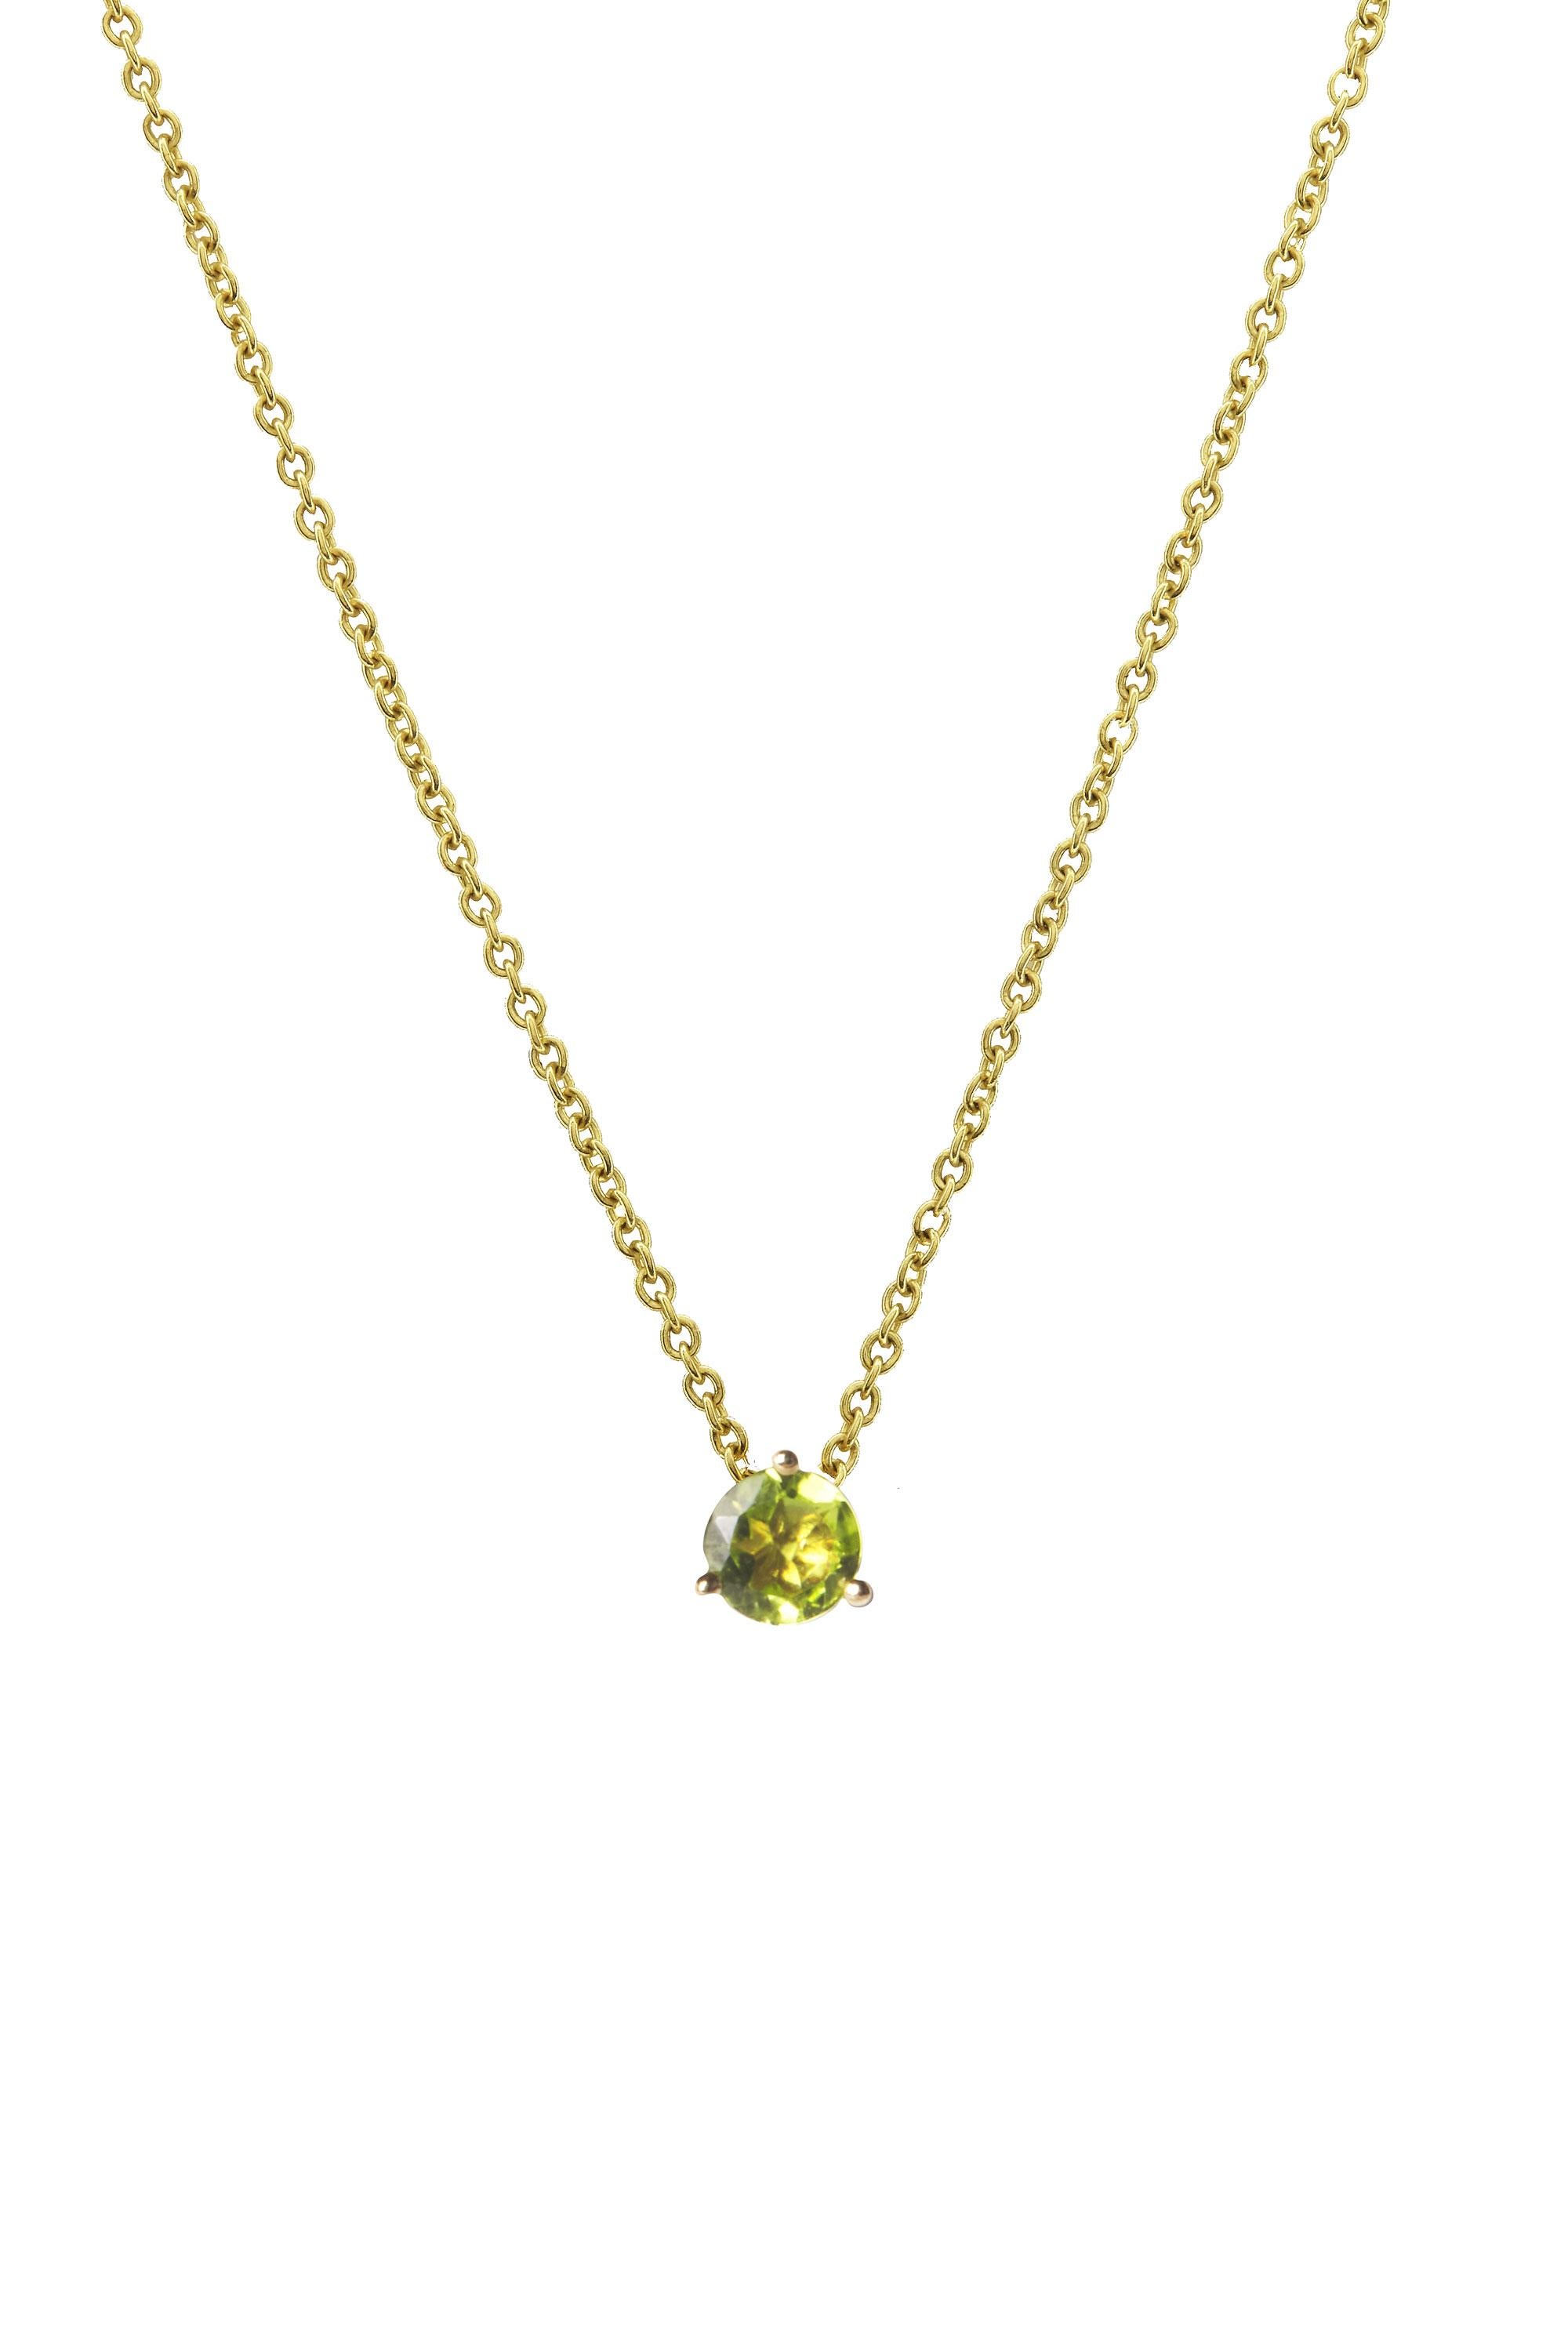 18 Karat Recycled Yellow Gold Green Peridot Round Cut Earrings and Necklace Set For Sale 2